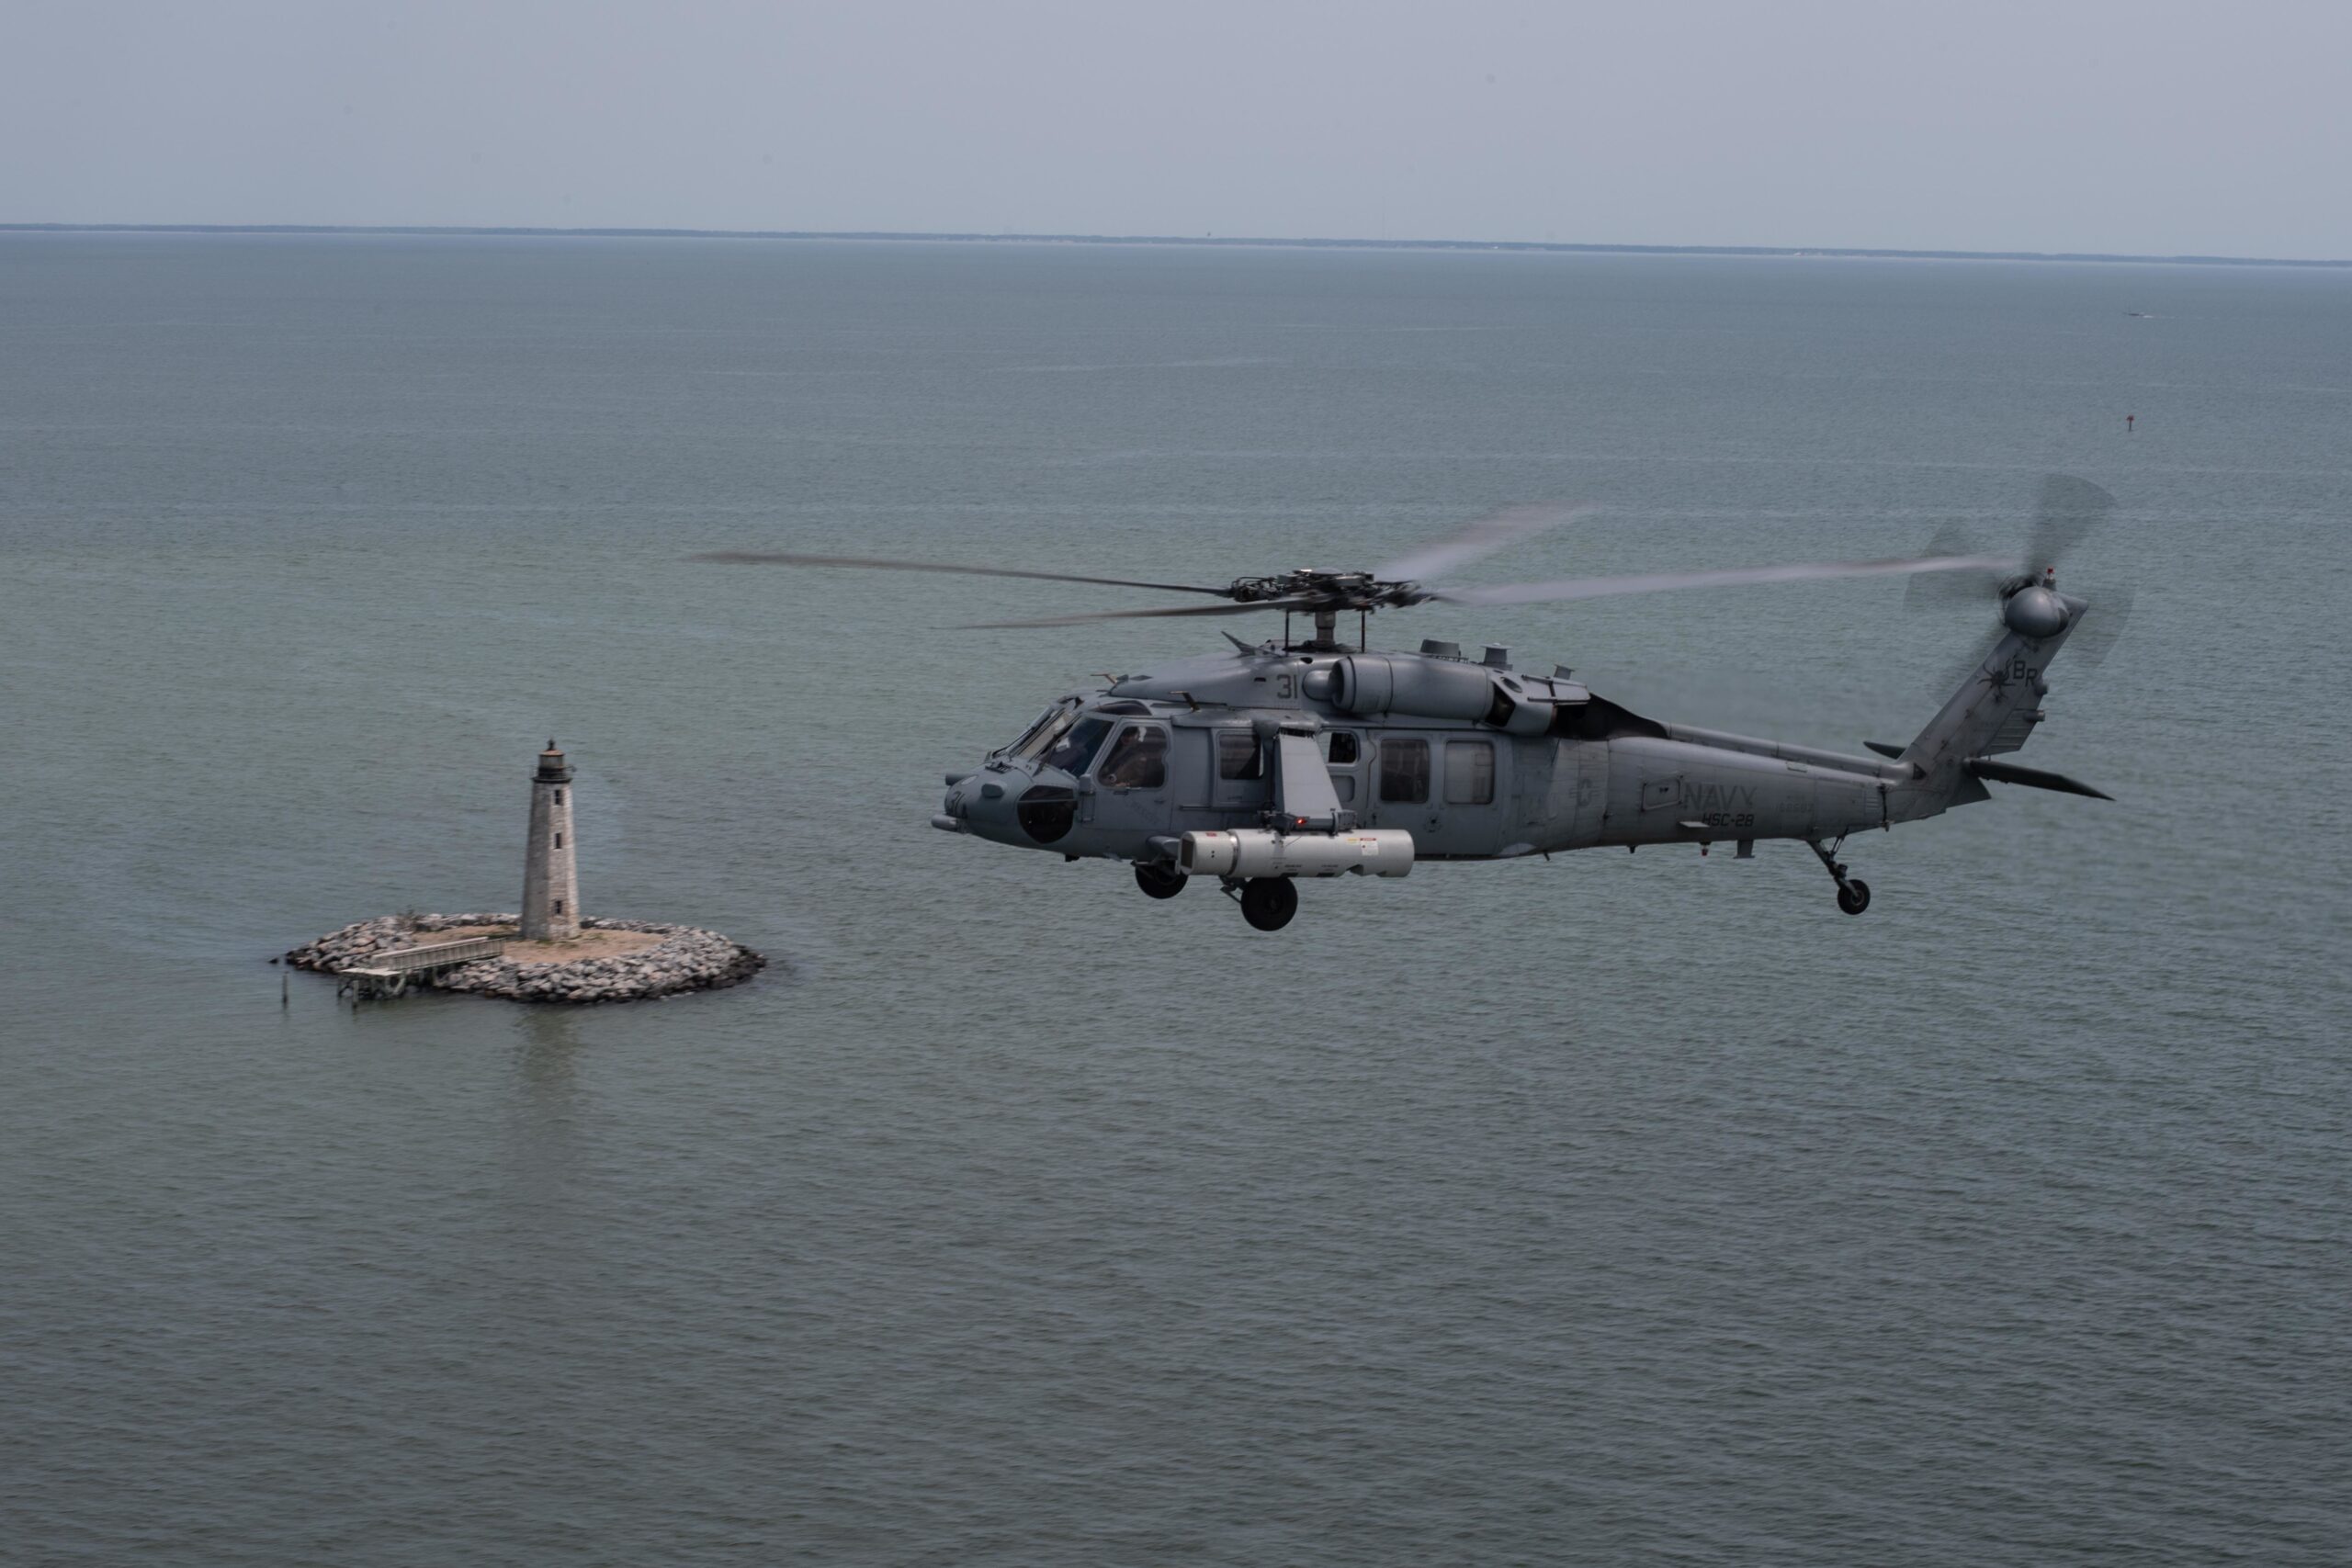 An MH-60S Sea Hawk, attached to the Dragon Whales of Helicopter Sea Combat Squadron (HSC) 28, equipped with its Airborne Laser Mine Detection System (ALMDS), flies over the Chesapeake Bay, April 29, 2020. Operated from the MH-60S Sea Hawk, ALMDS provides rapid wide-area reconnaissance and assessment of mine threats in littoral zones, confined straits, and choke points. HSC-28 is stationed in Norfolk, Virginia. (U.S. Navy photo by Mass Communication Specialist 3rd Class Rebekah M. Rinckey)